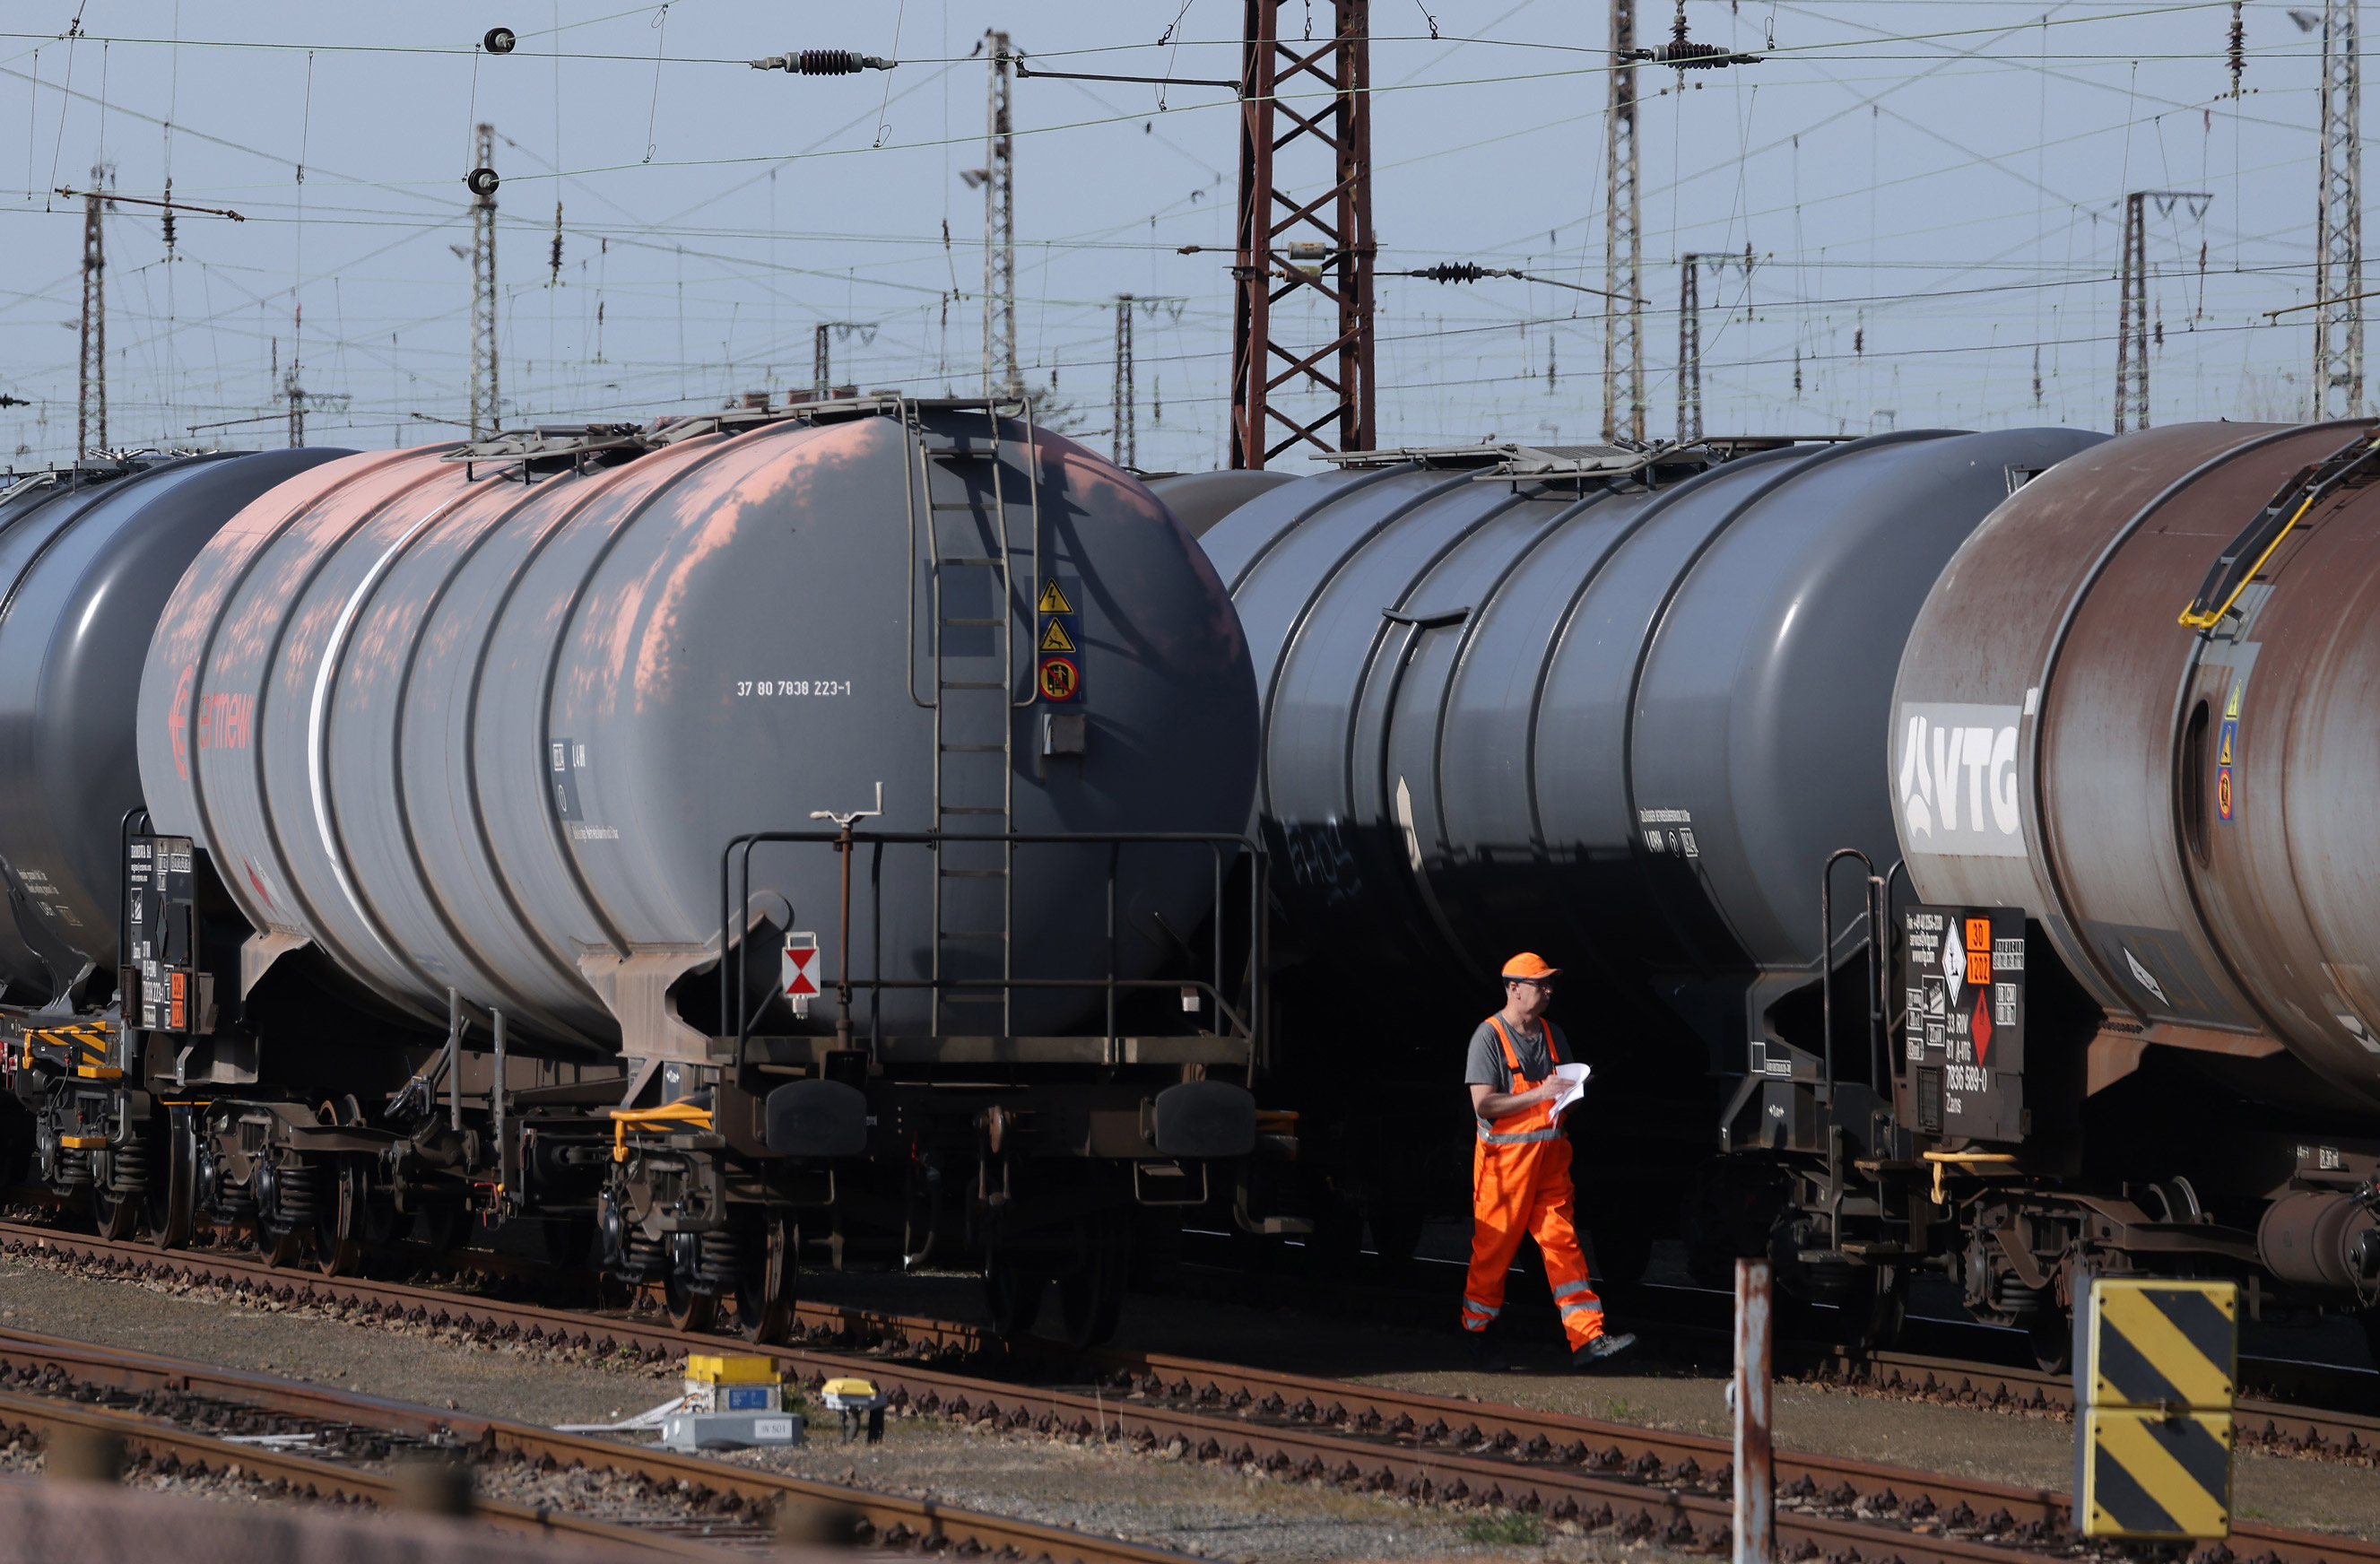 A railway worker walks among tank cars used carrying petroleum products refined from Russian oil, in Spergau, Germany, on April 12.